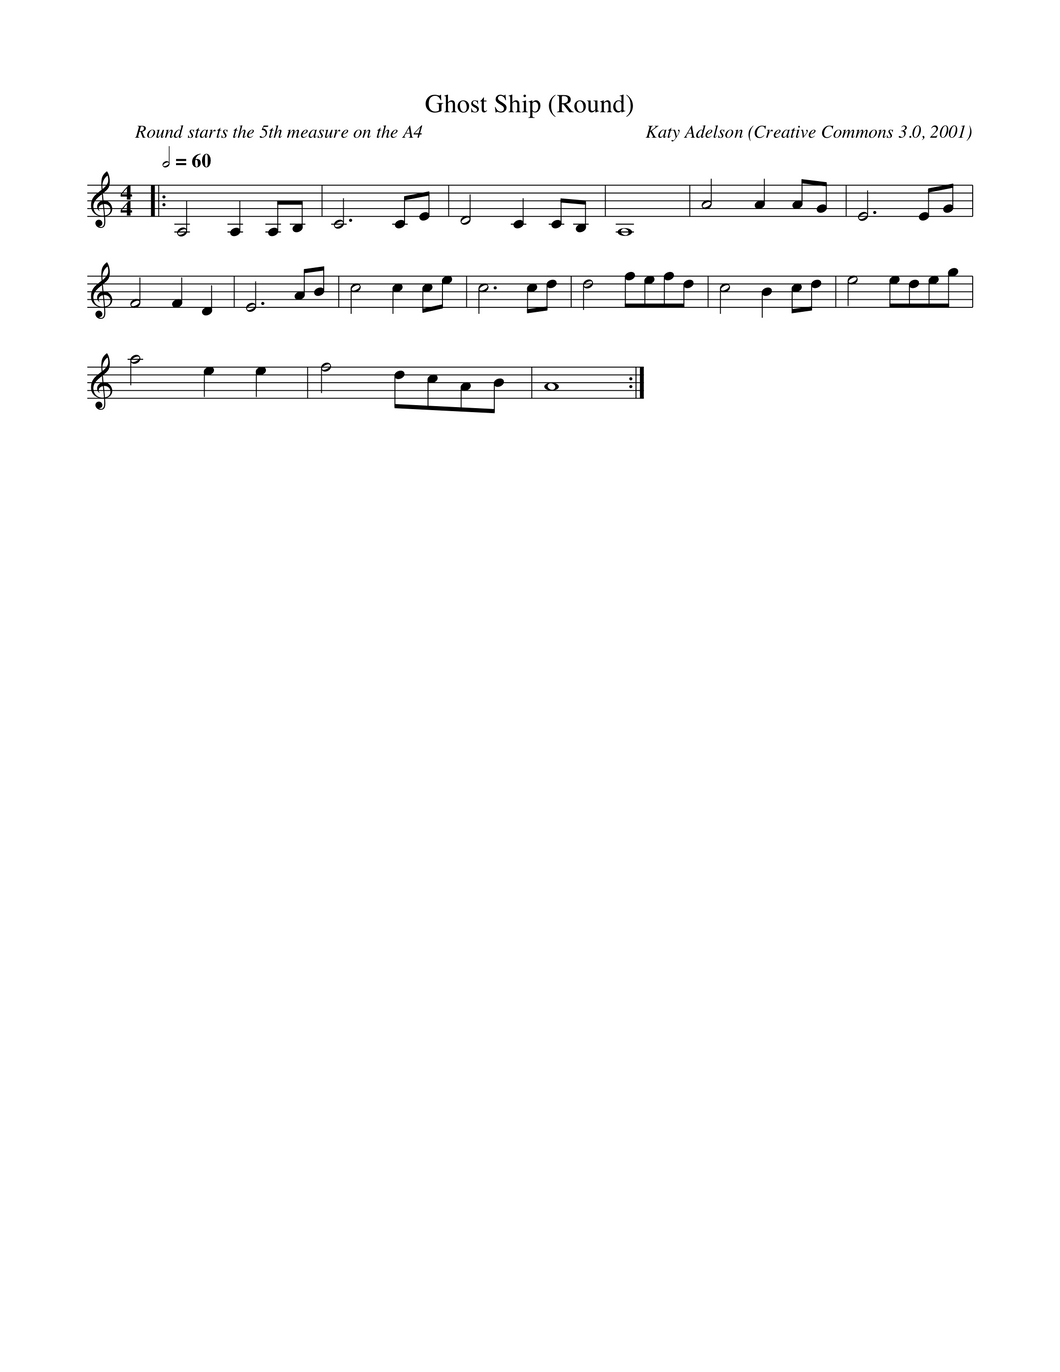 Ghost Ship (Round) Violin Sheet Music by Katy Adelson